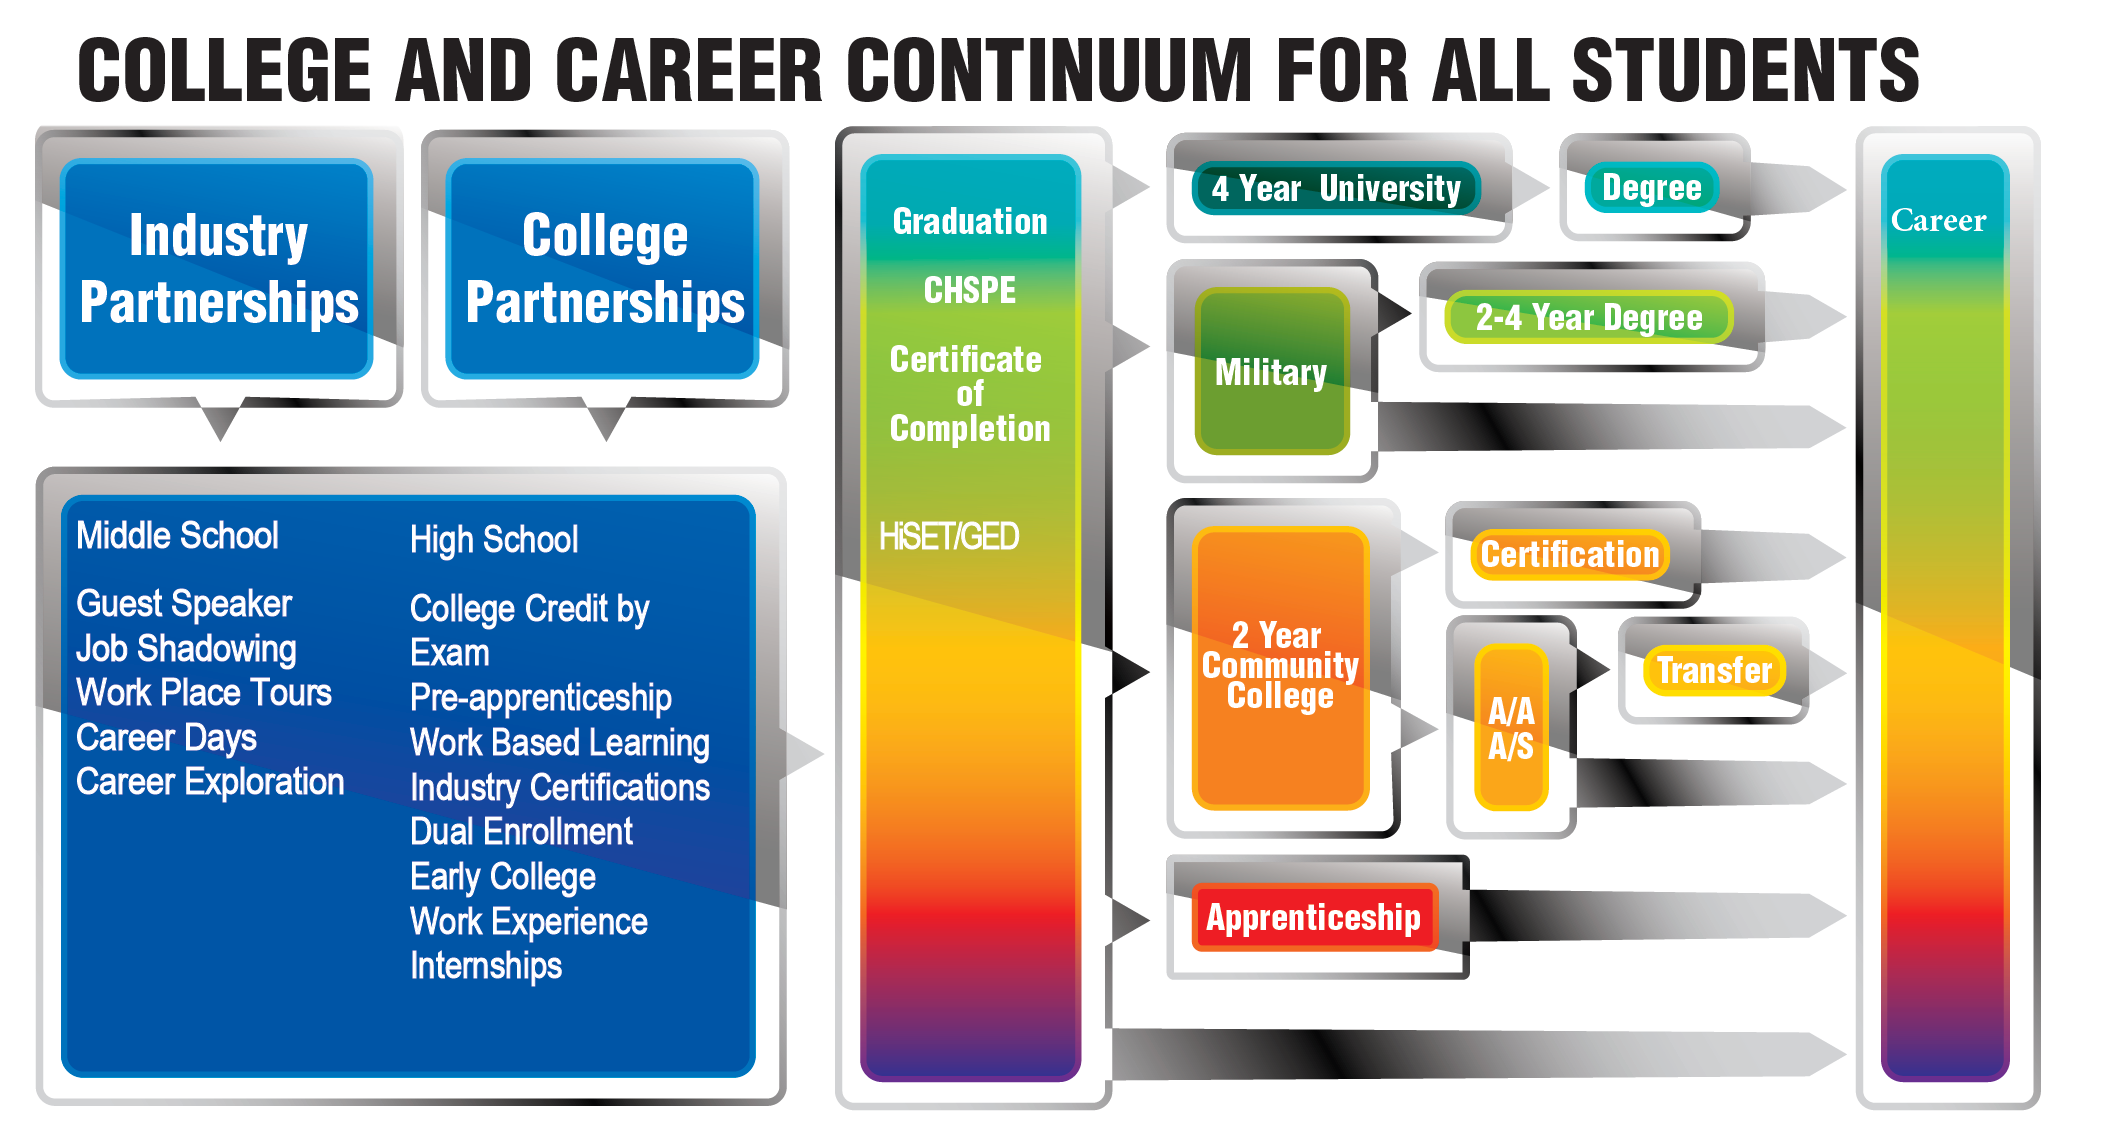 College and carreer continuum for all students diagram